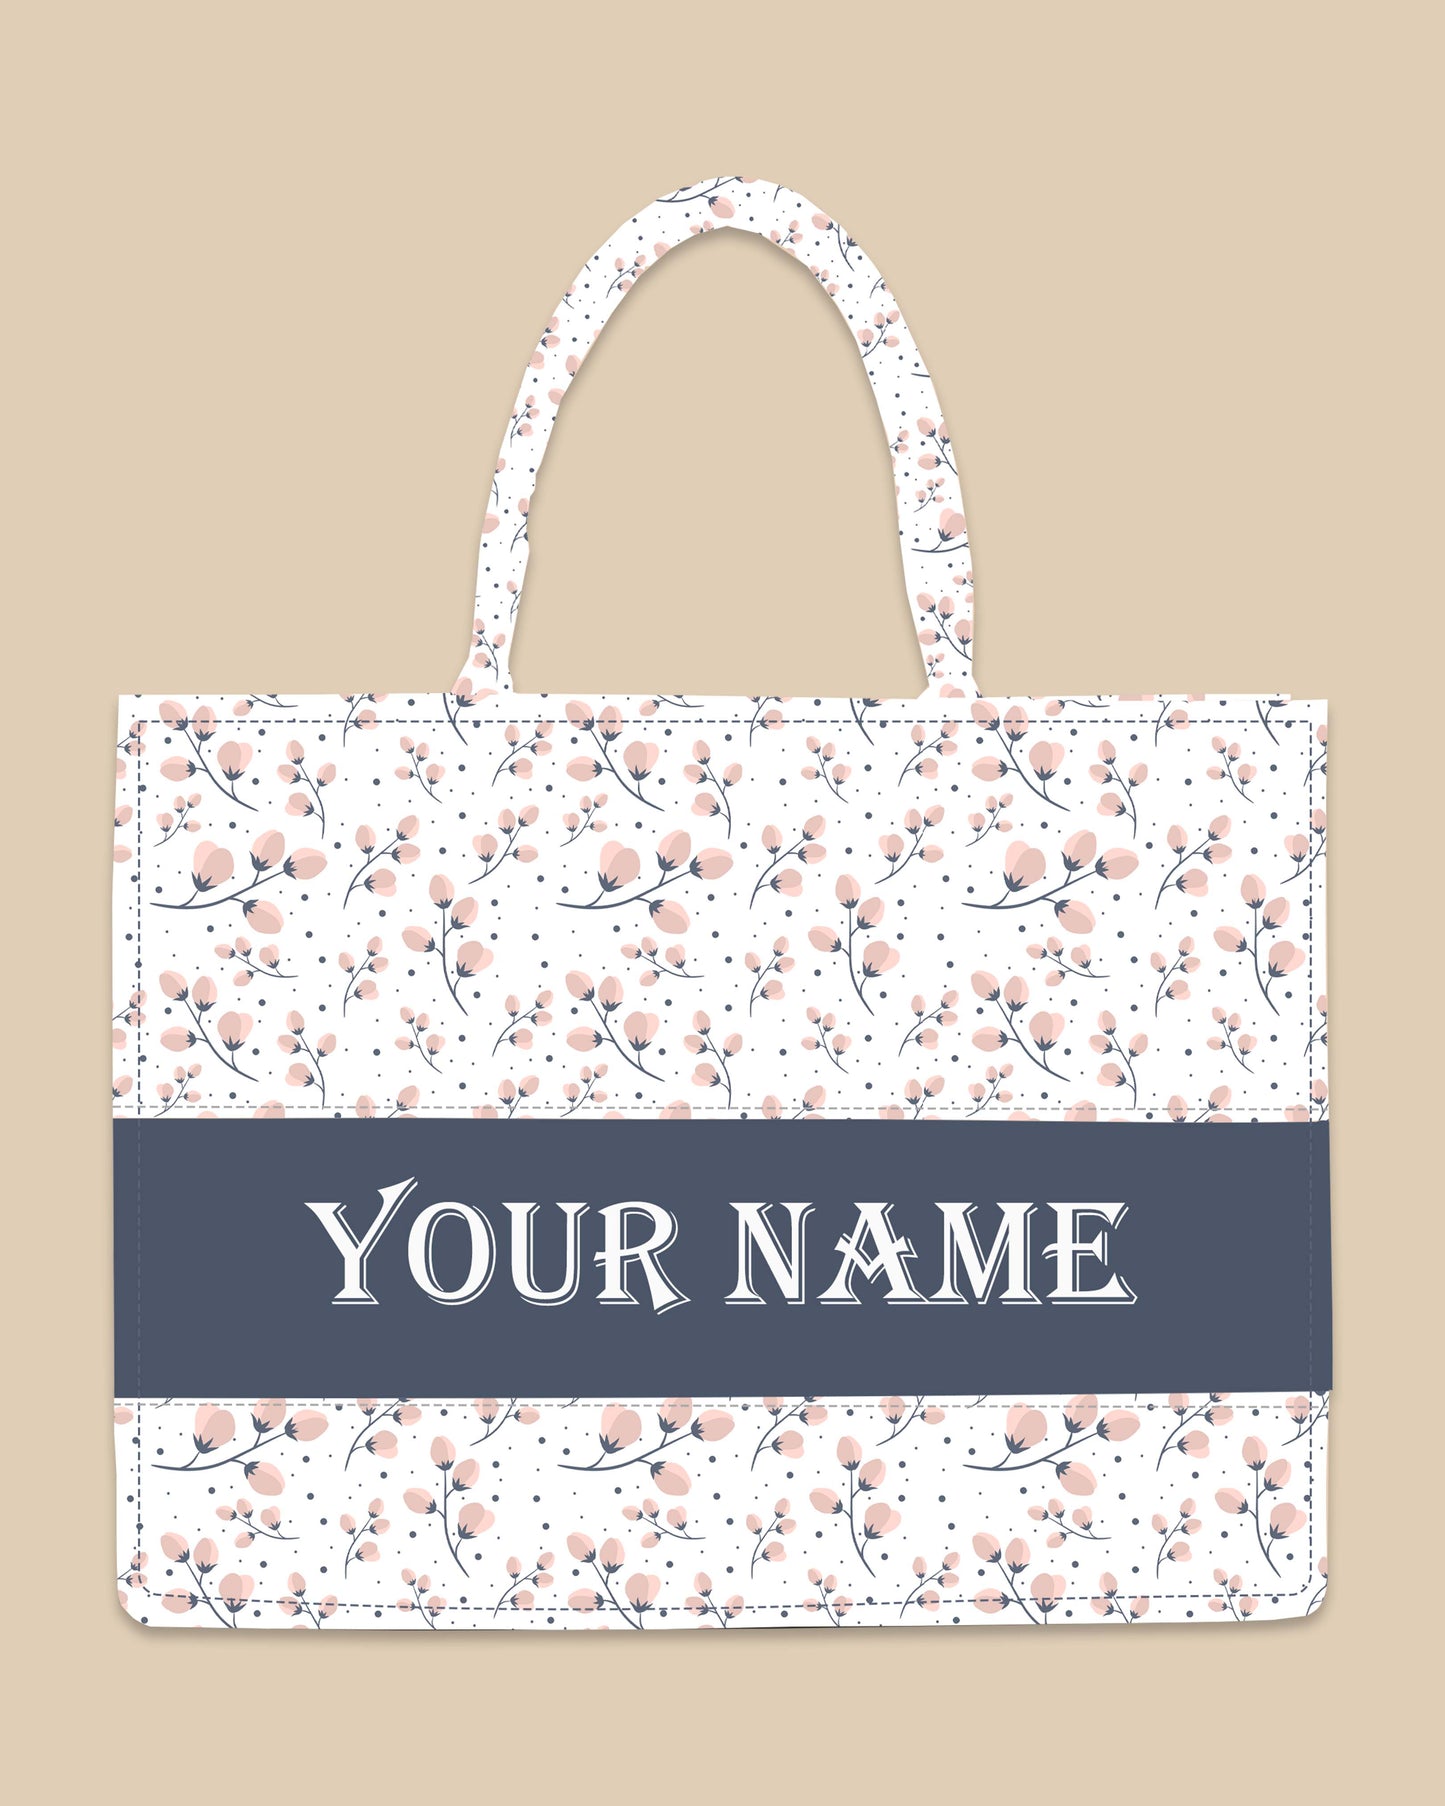 Customized Tote Bag Designed With Easter Spring Flower Design